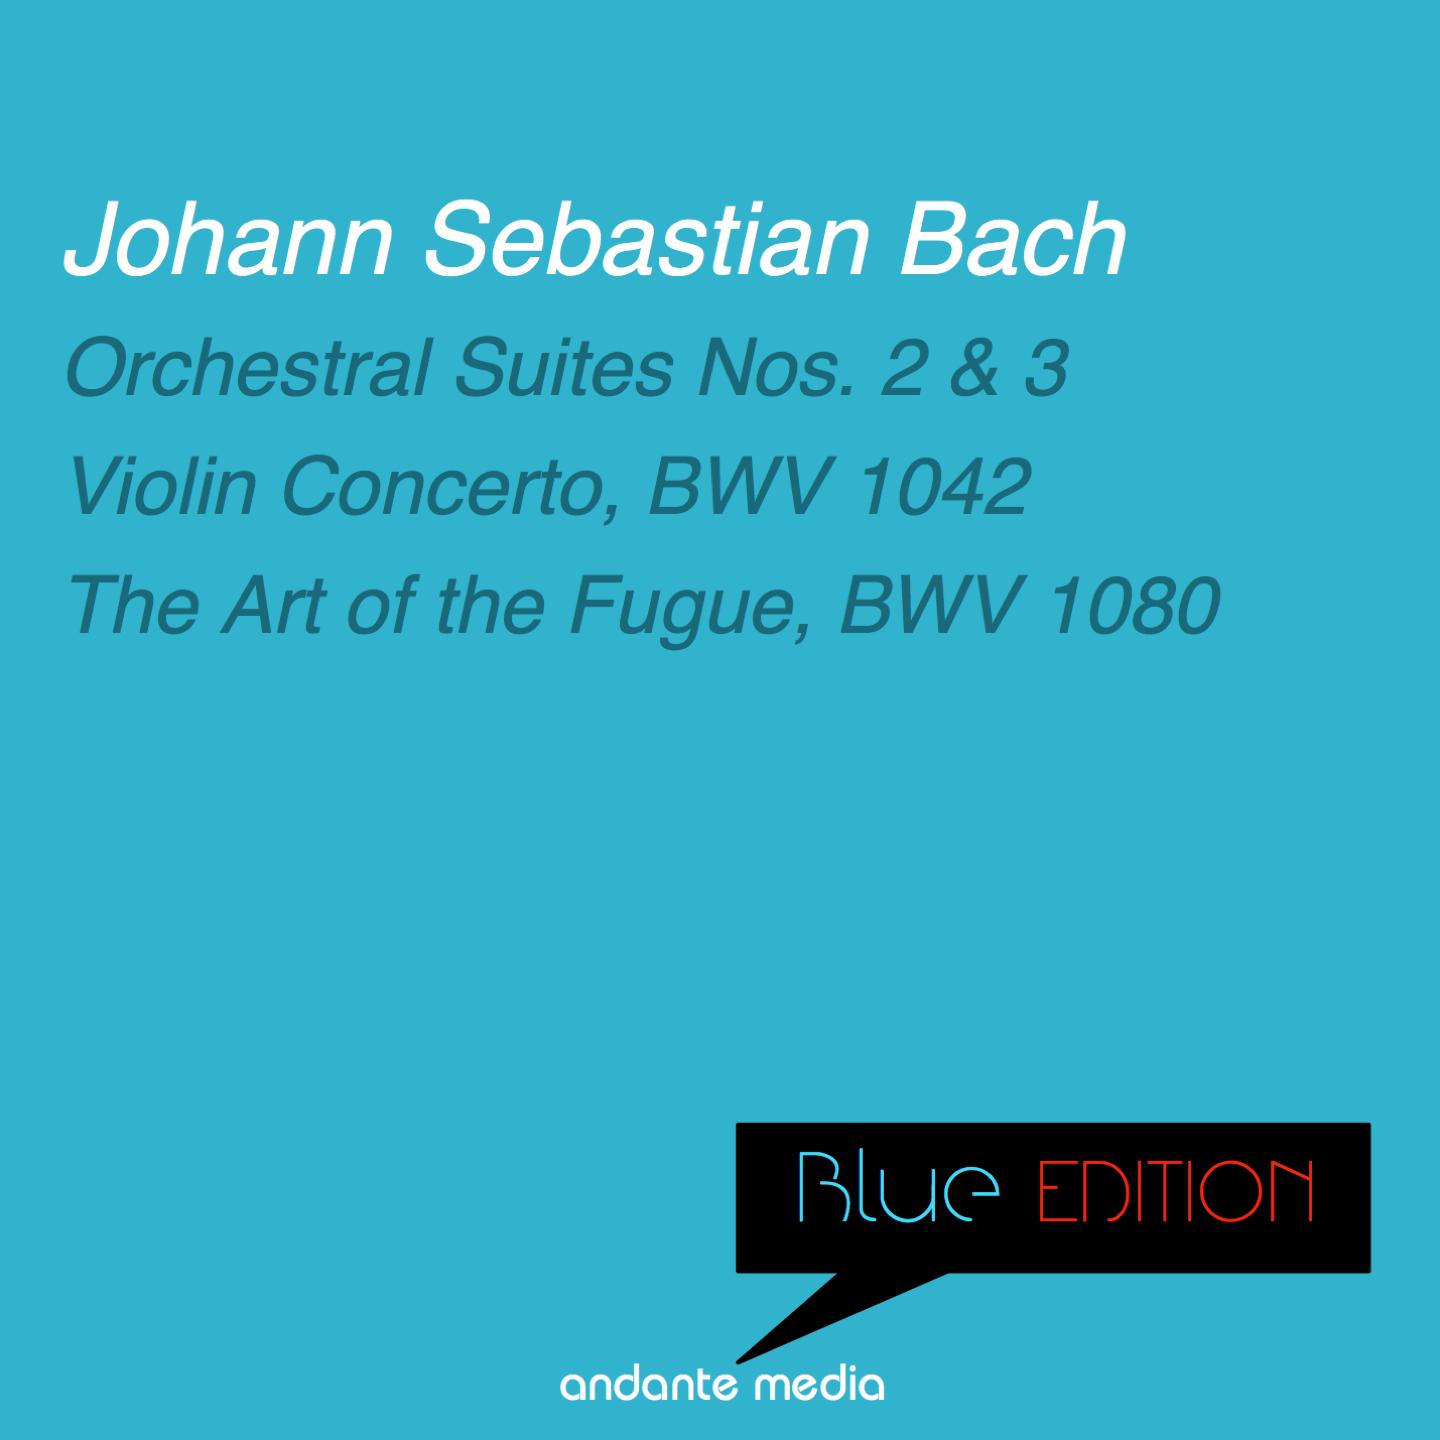 Orchestral Suite No. 3 in D Major, BWV 1068: Gavottes I & II